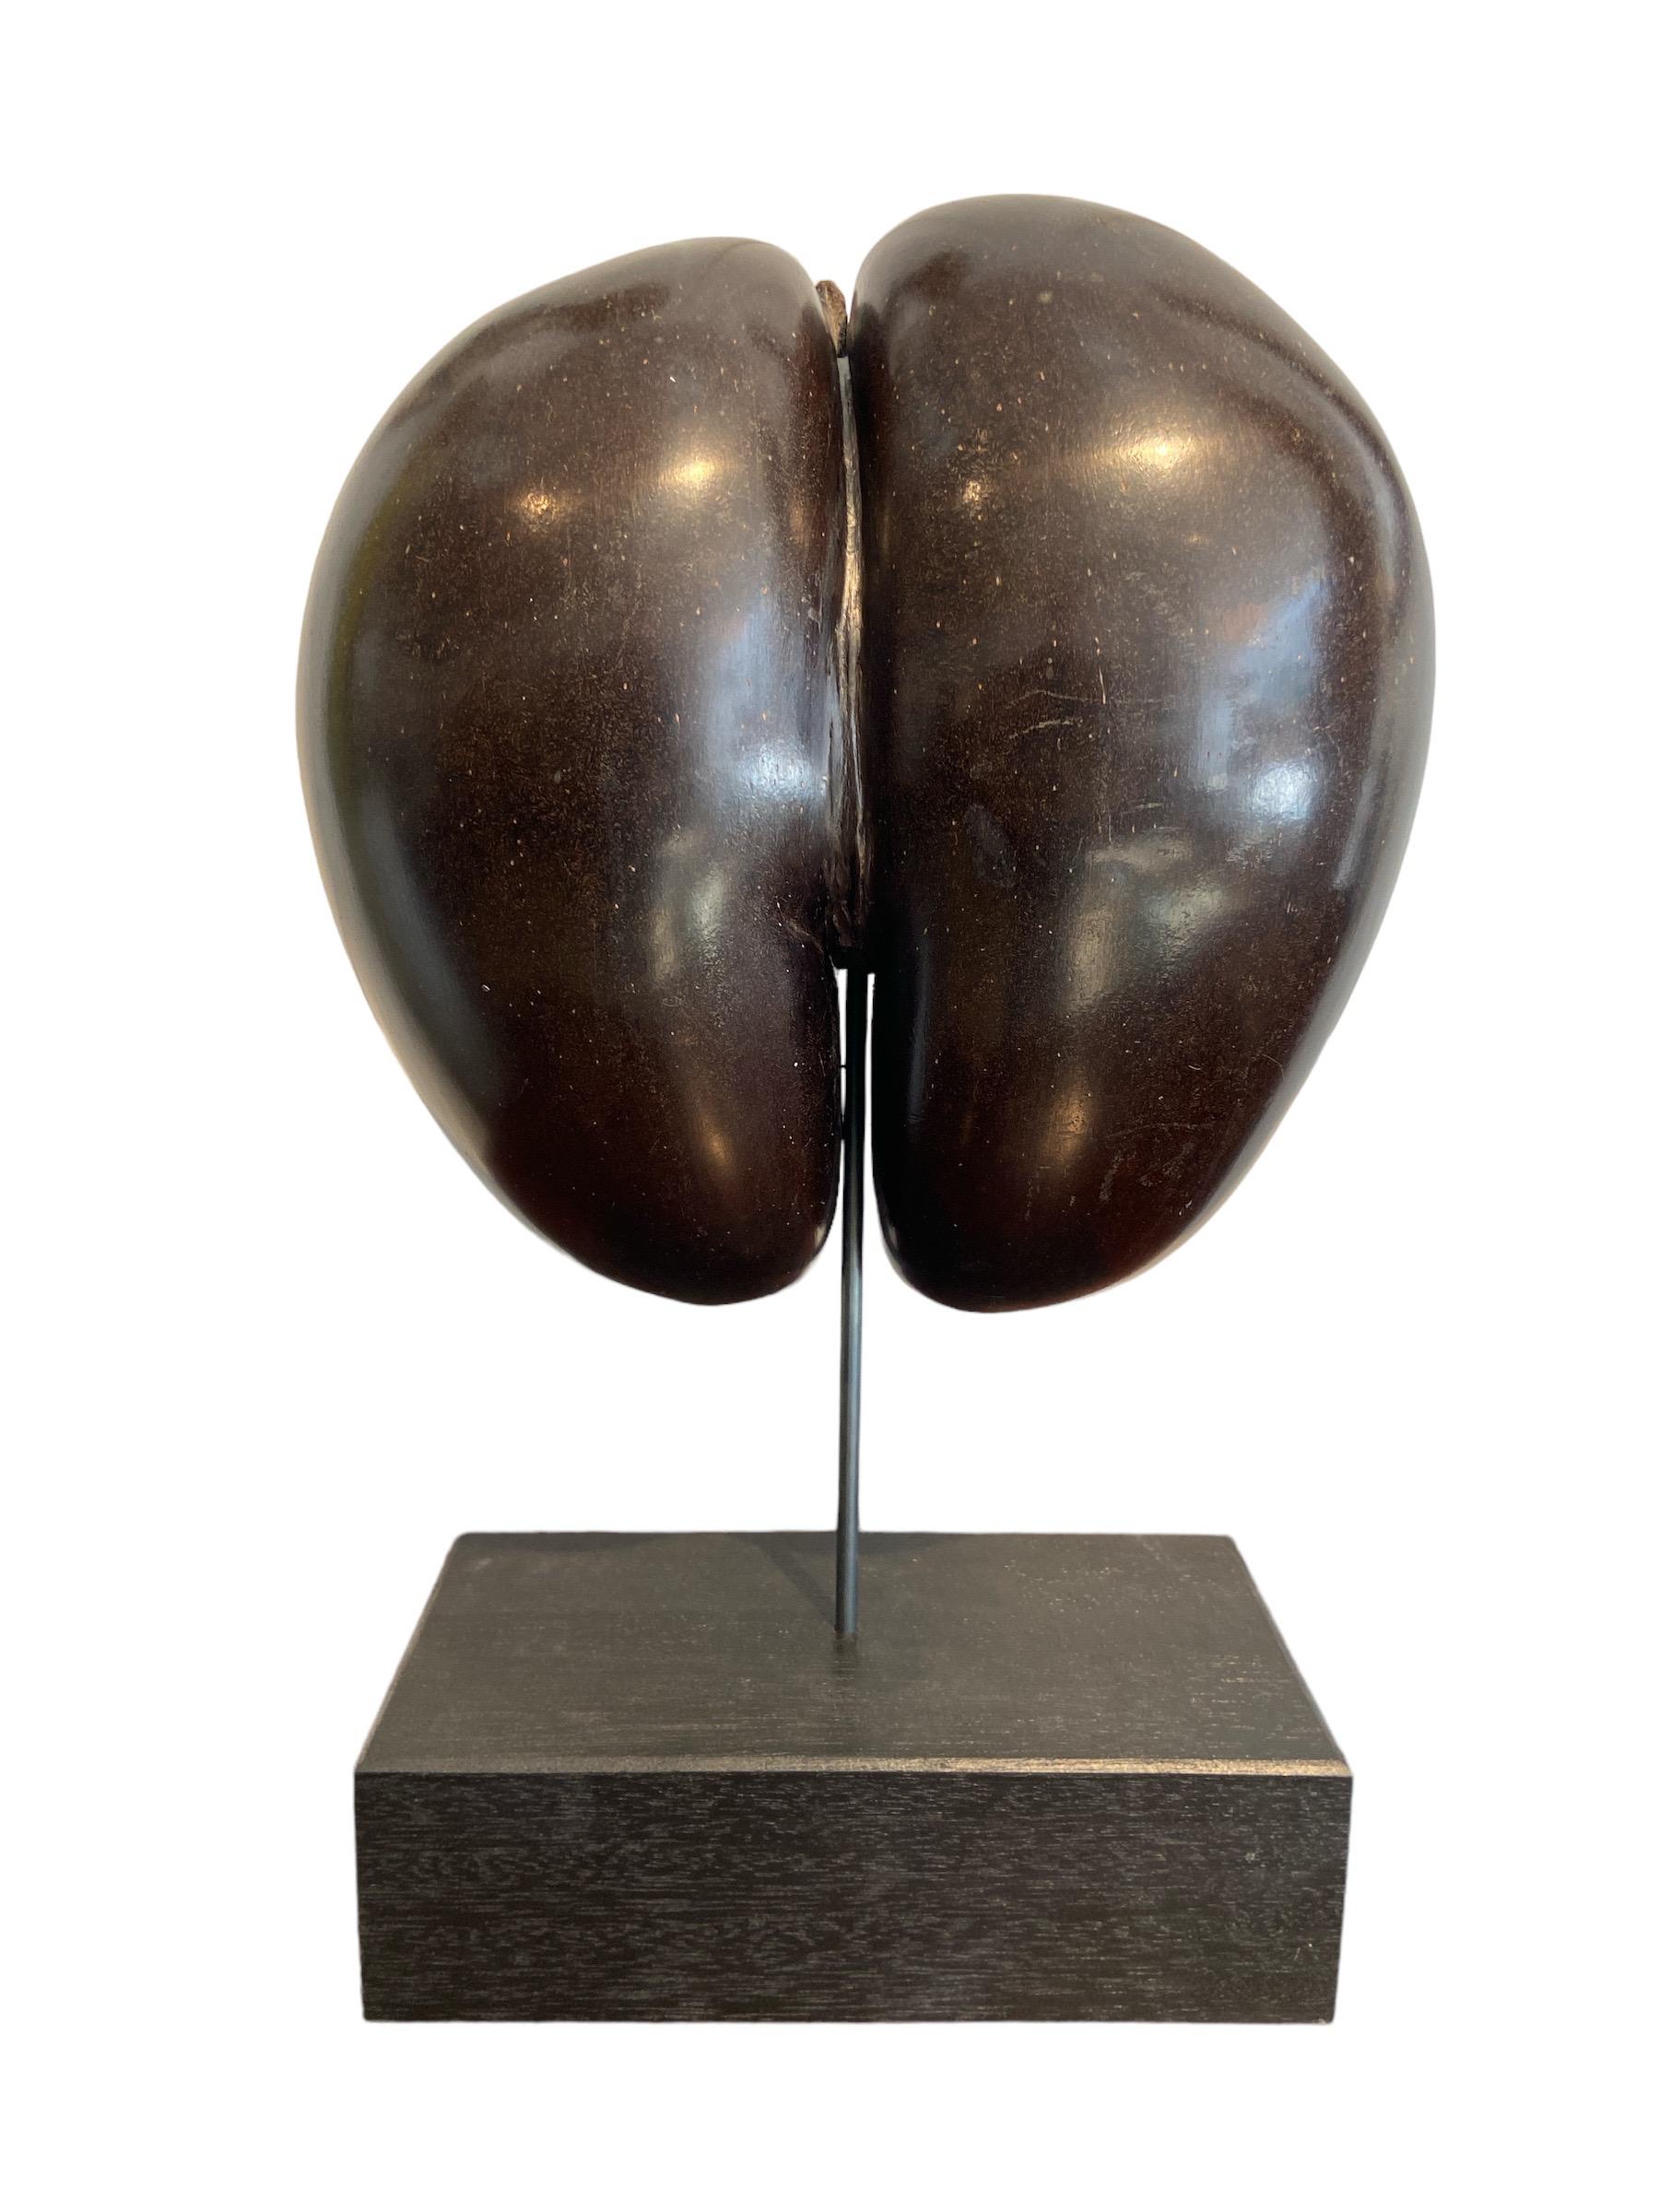 Polished Coco de Mere from the Seychelles, circa 2000. 
With documents, see the last picture. Presented on a stand.